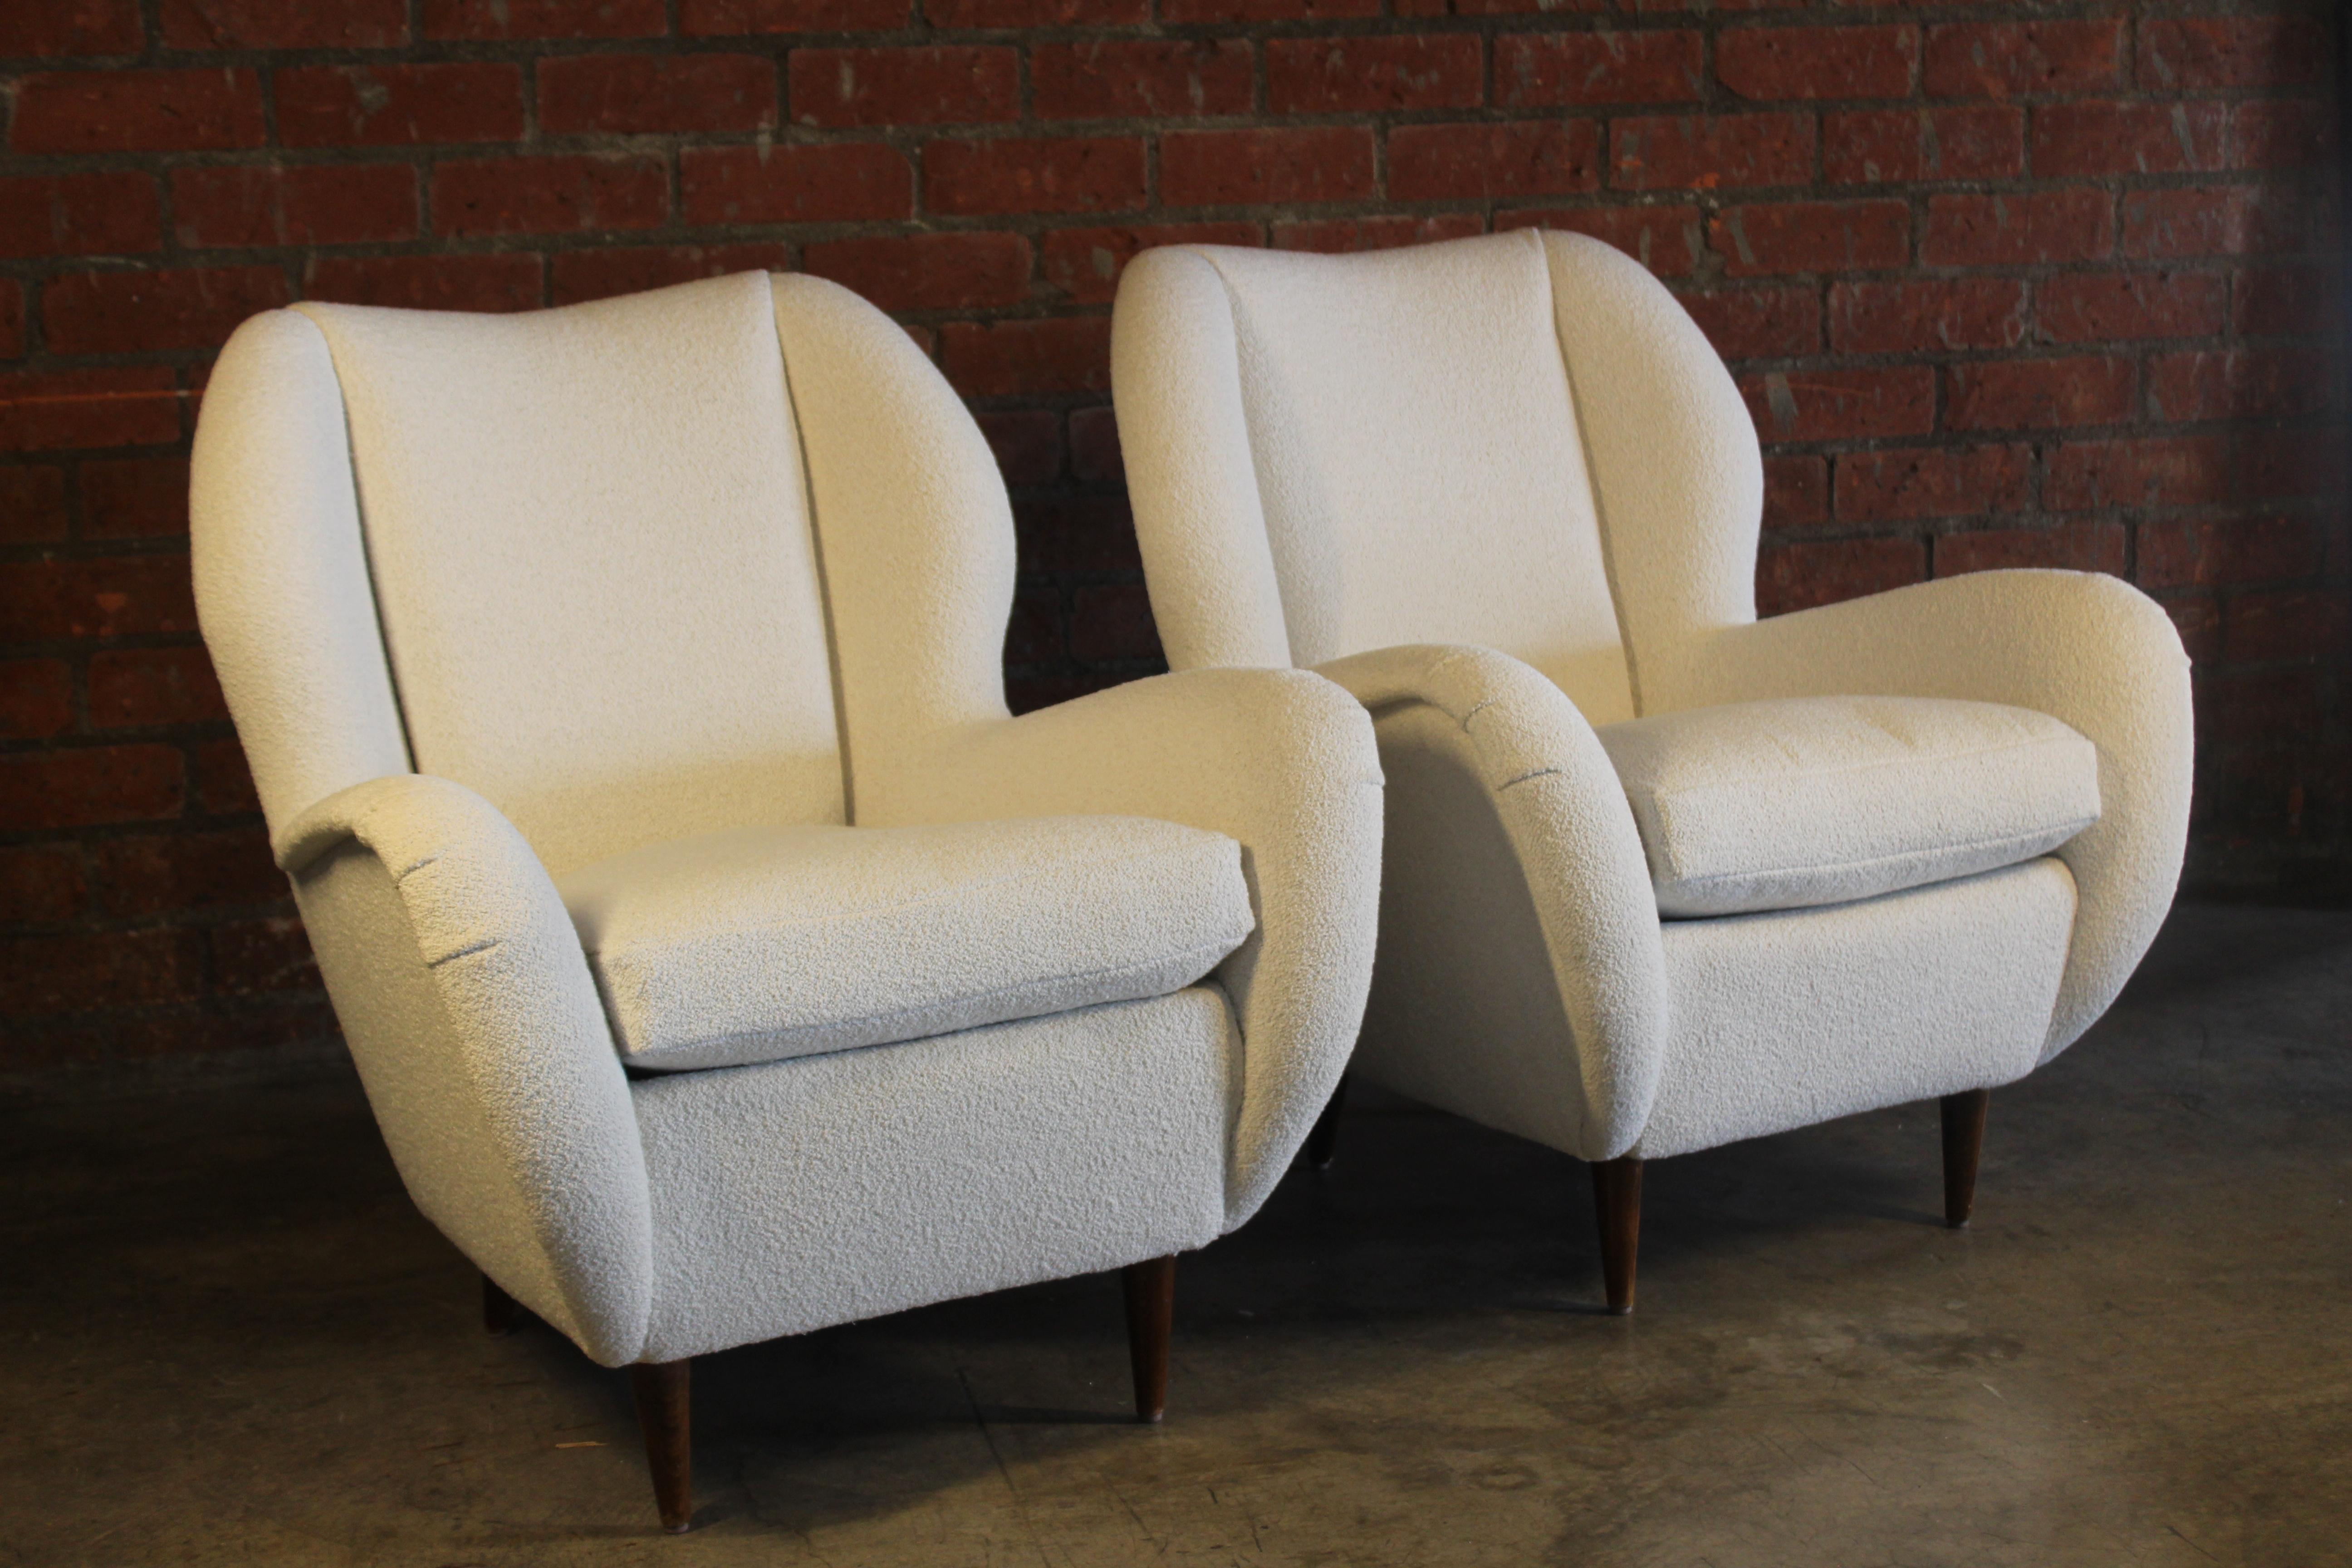 Pair of vintage 1950s Italian lounge chairs attributed to Paolo Buffa. Reupholstered in a wool blend Italian boucle. Tapered walnut legs retain their original finish. Both are in excellent condition.